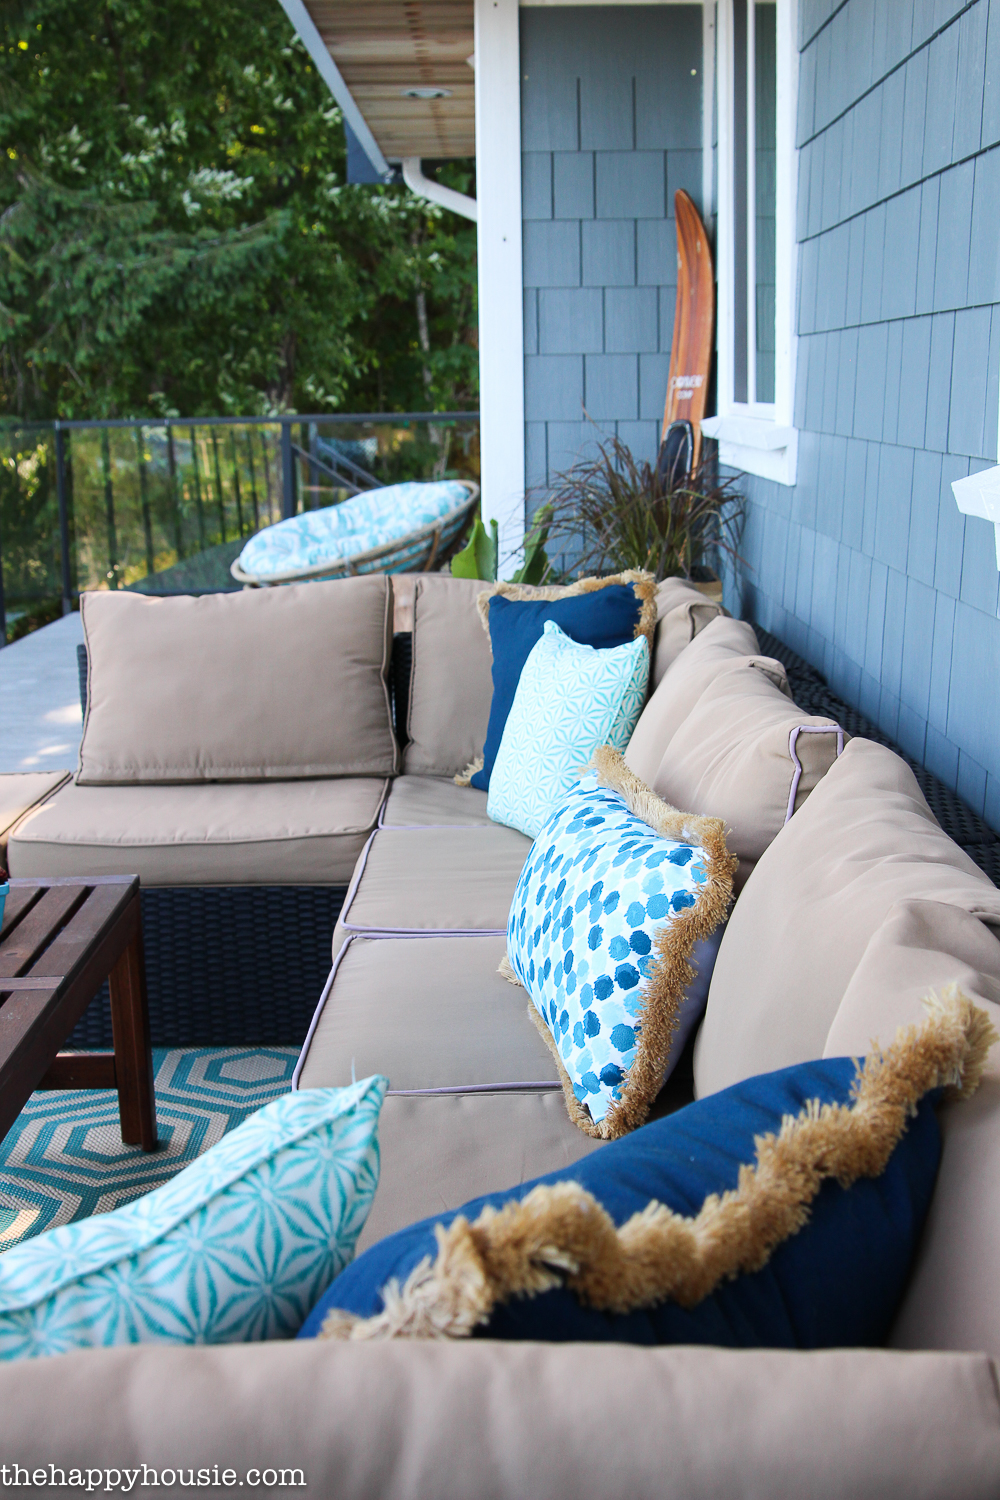 There is an outdoor patio with blue throw pillows on it.